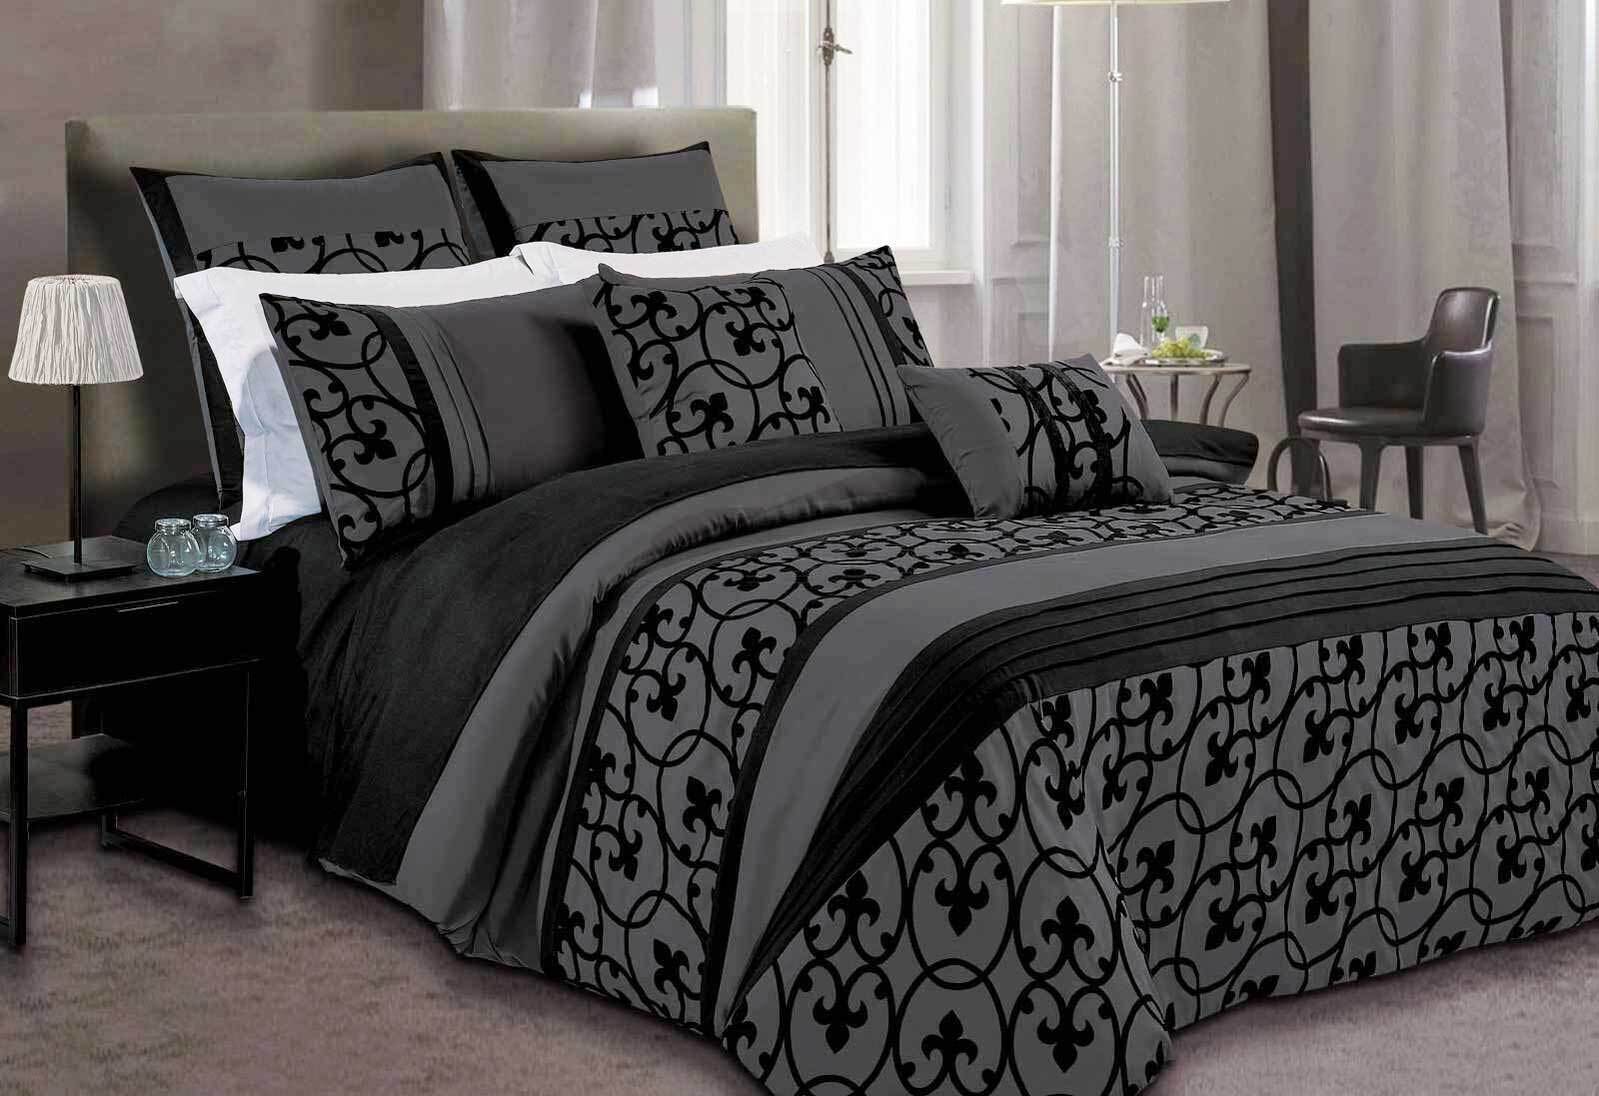 Dursley Black Quilt Cover Set, Grey And Teal Super King Bedding